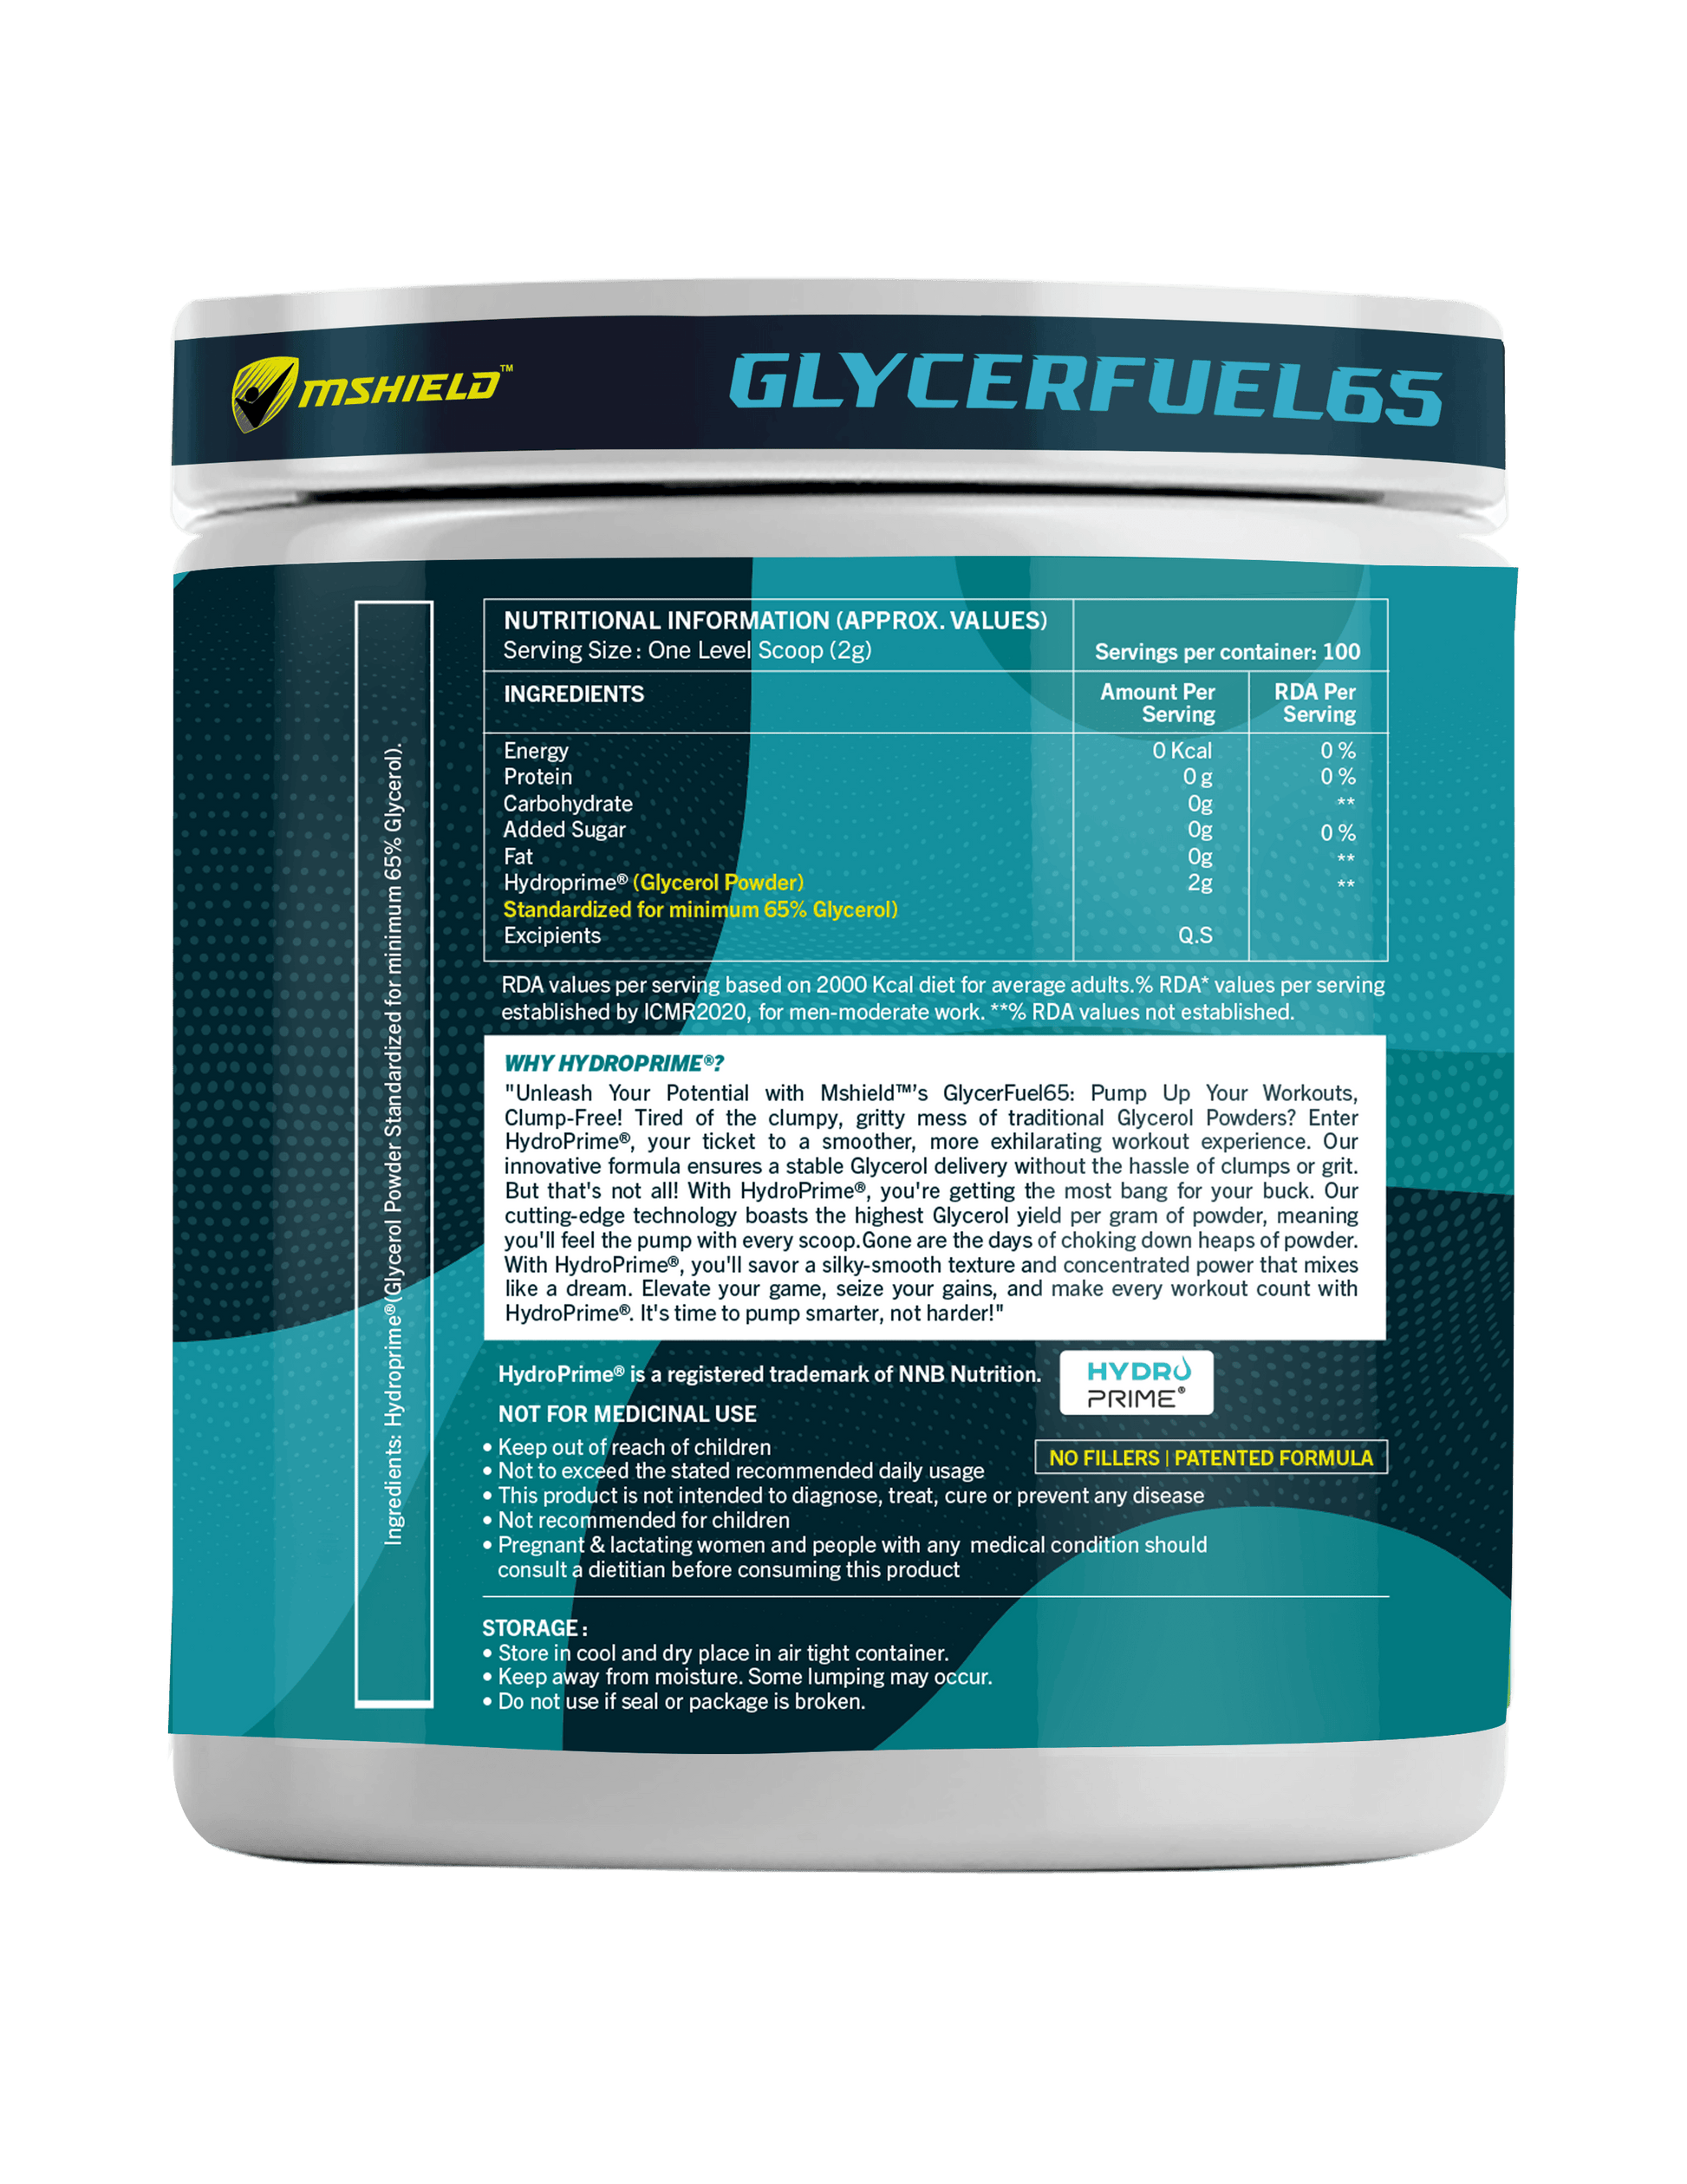 Stay Hydrated During Workouts with Glycerfuel-65 Hydroprime Supplement